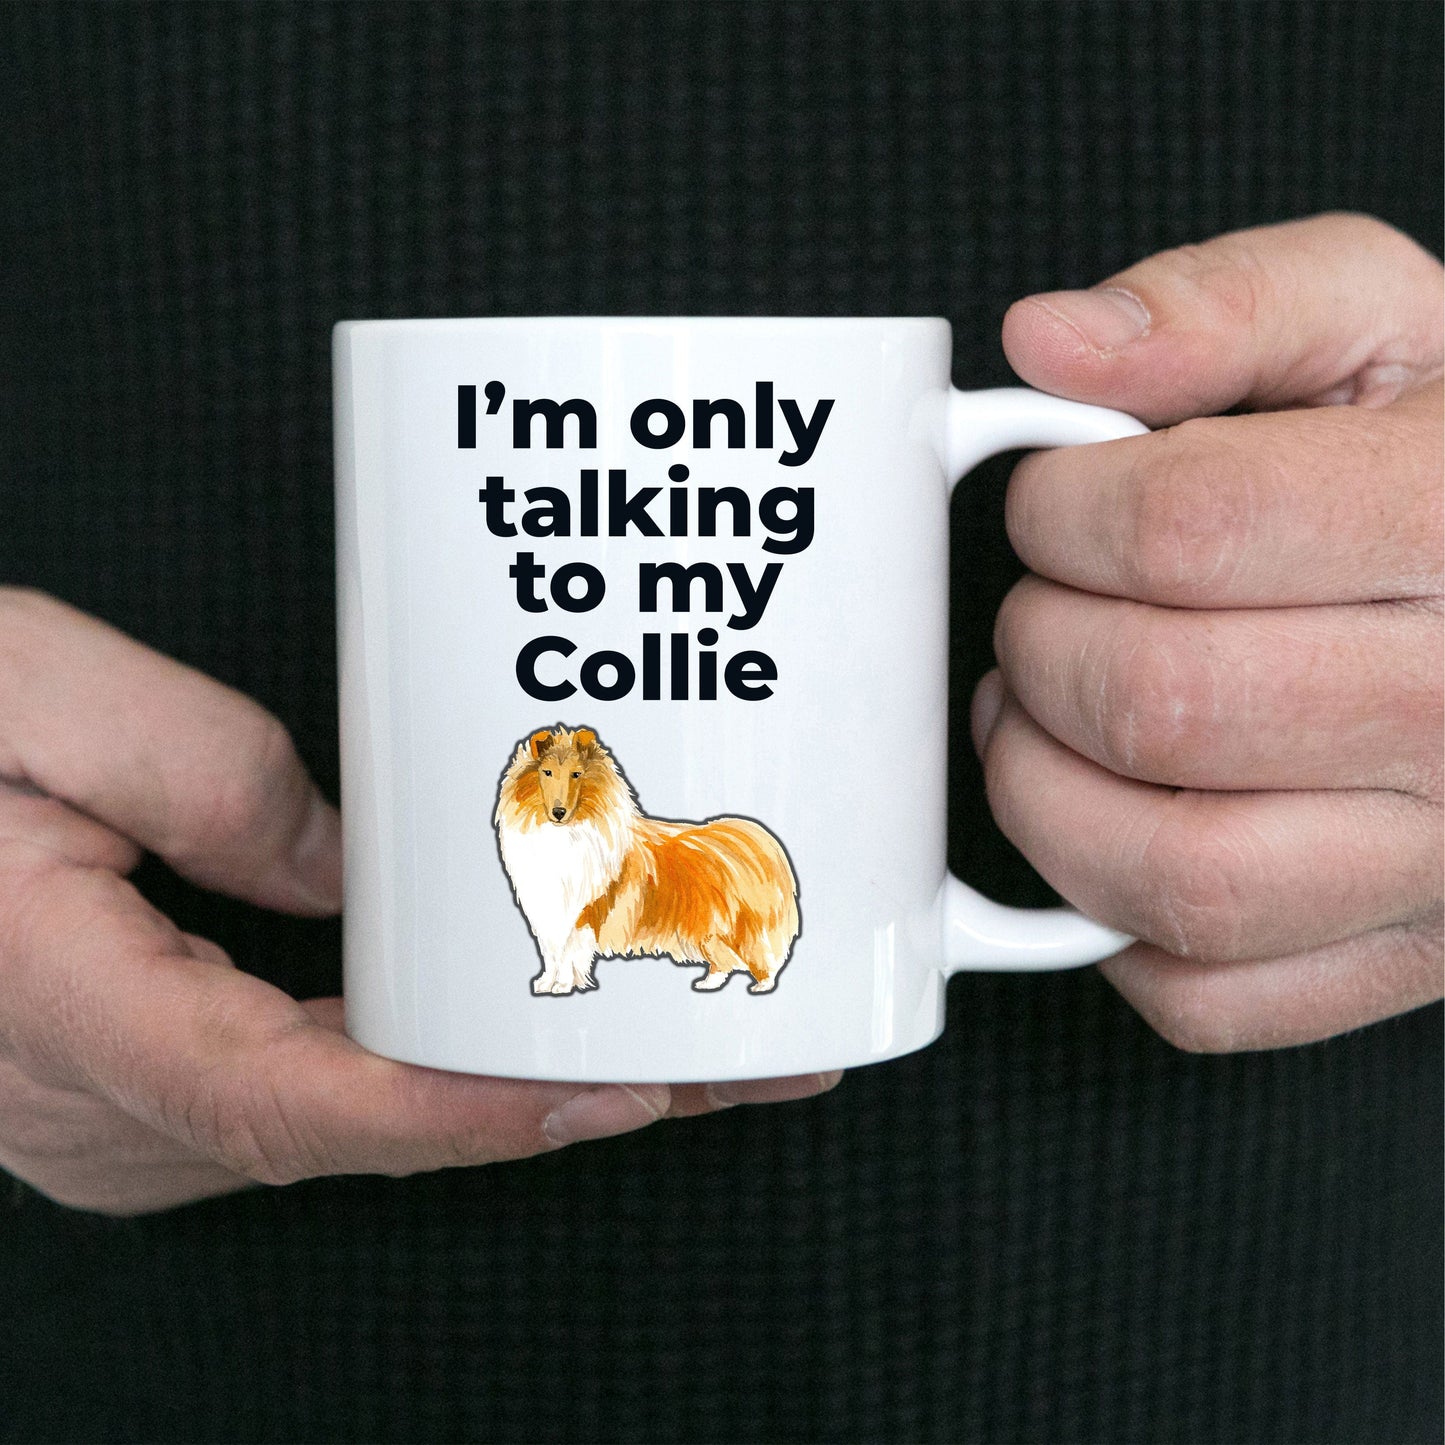 Collie Dog Coffee Mug - I'm Only talking to my Collie